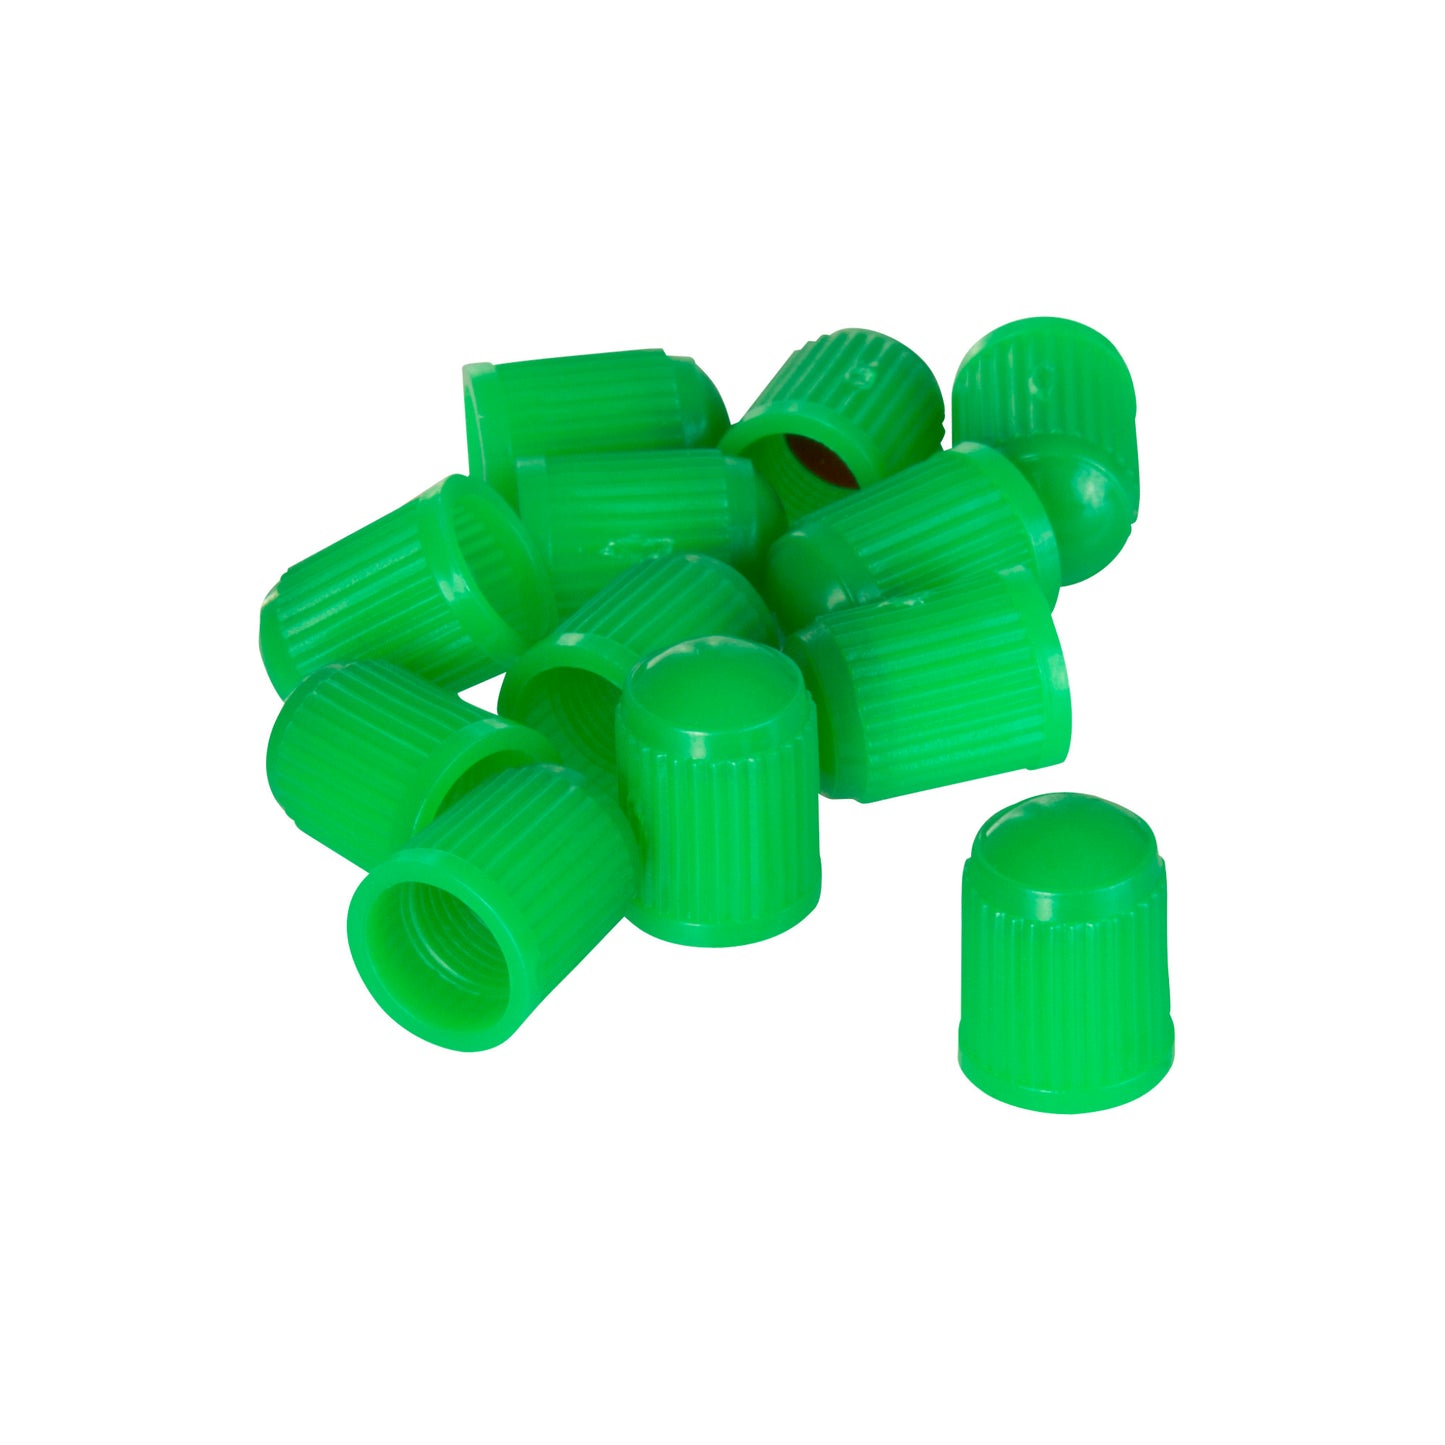 TPMS Green Plastic Cap with Seal, 100-pack